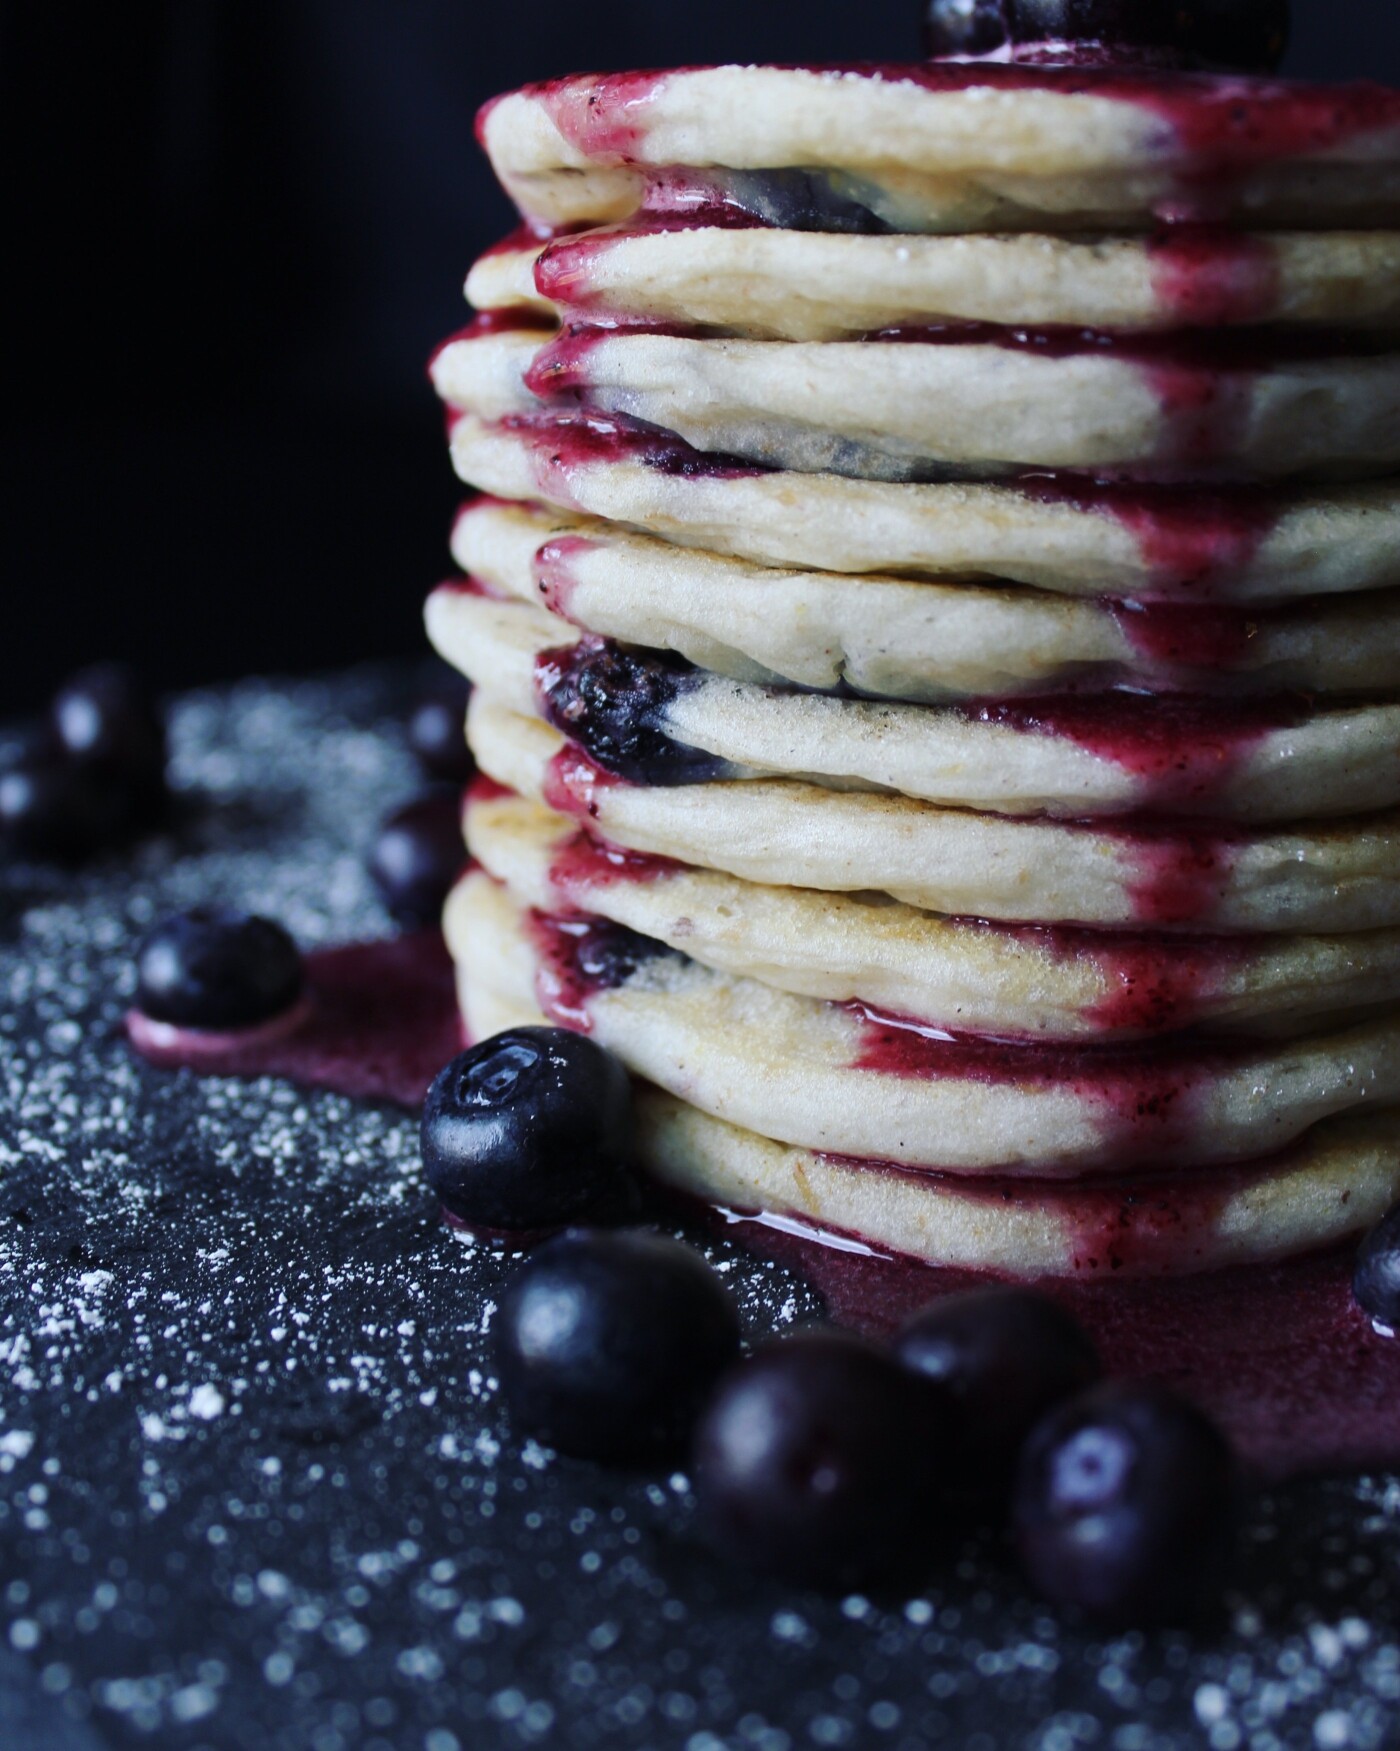 These pancakes were made on a Saturday morning just after I visited a farmers market. I was able to get my hands on some of the freshest blueberries. I thought the perfect way to use the blueberries would be to fold them into a creamy batter and create fluffy pancakes with them. This was my end result, a buttery, delicate, and sweet stack of fresh homemade blueberry pancakes. Before I knew it, all that remained on my plate was dribbles of syrup. 